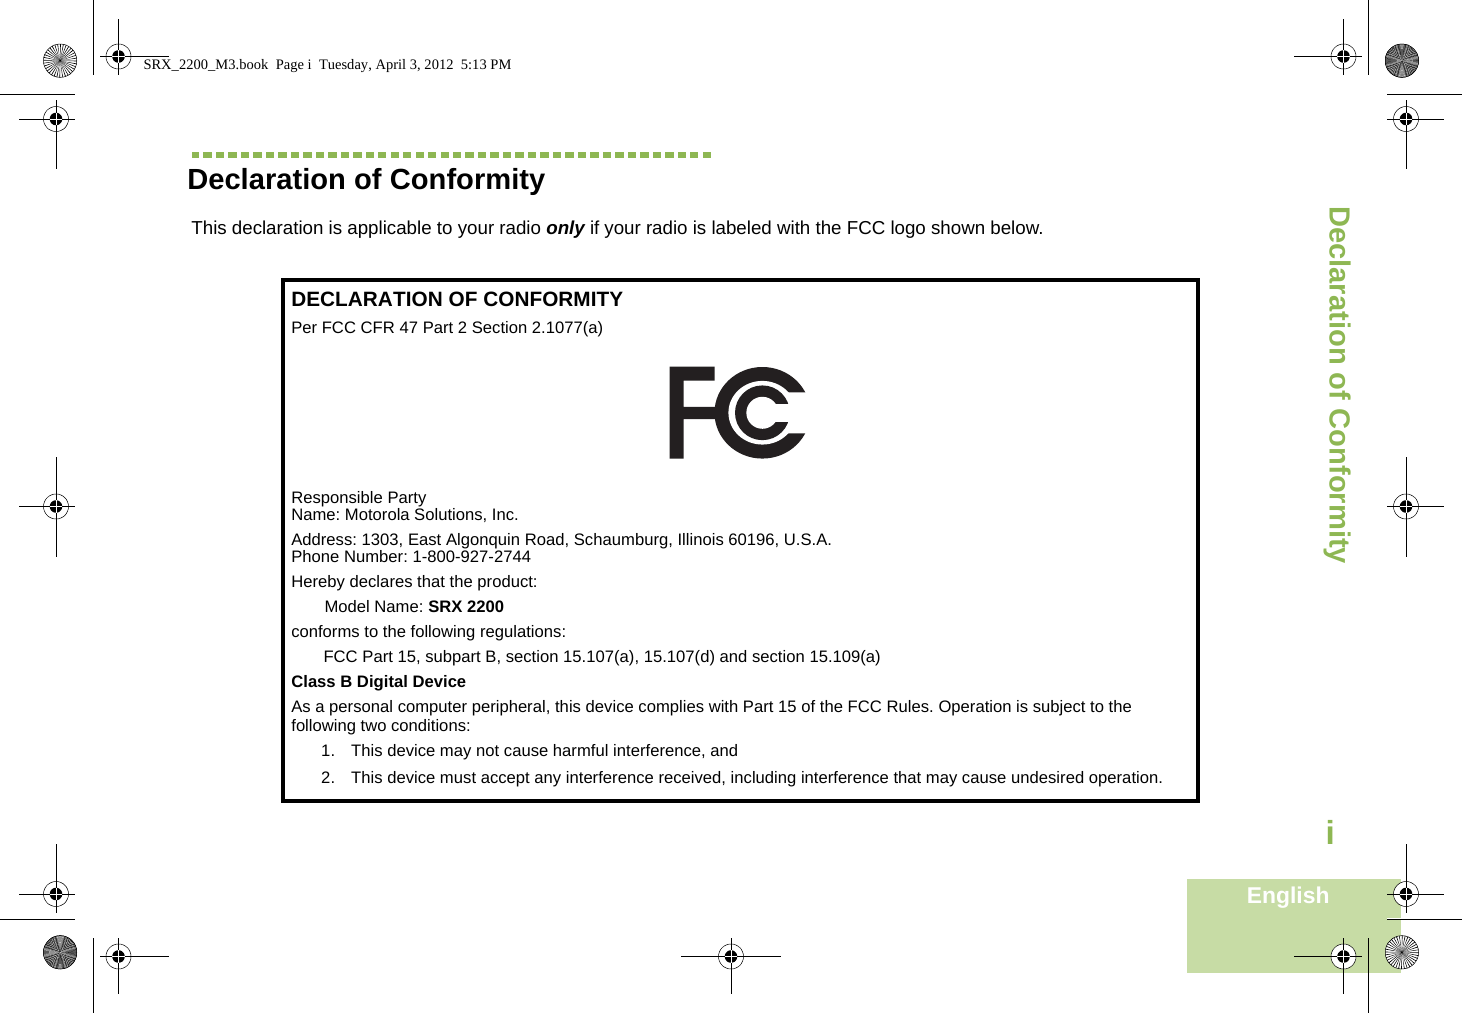 Declaration of ConformityEnglishiDeclaration of ConformityThis declaration is applicable to your radio only if your radio is labeled with the FCC logo shown below.DECLARATION OF CONFORMITYPer FCC CFR 47 Part 2 Section 2.1077(a)Responsible Party Name: Motorola Solutions, Inc.Address: 1303, East Algonquin Road, Schaumburg, Illinois 60196, U.S.A.Phone Number: 1-800-927-2744Hereby declares that the product:Model Name: SRX 2200conforms to the following regulations:FCC Part 15, subpart B, section 15.107(a), 15.107(d) and section 15.109(a)Class B Digital DeviceAs a personal computer peripheral, this device complies with Part 15 of the FCC Rules. Operation is subject to the following two conditions:1. This device may not cause harmful interference, and 2. This device must accept any interference received, including interference that may cause undesired operation.SRX_2200_M3.book  Page i  Tuesday, April 3, 2012  5:13 PM